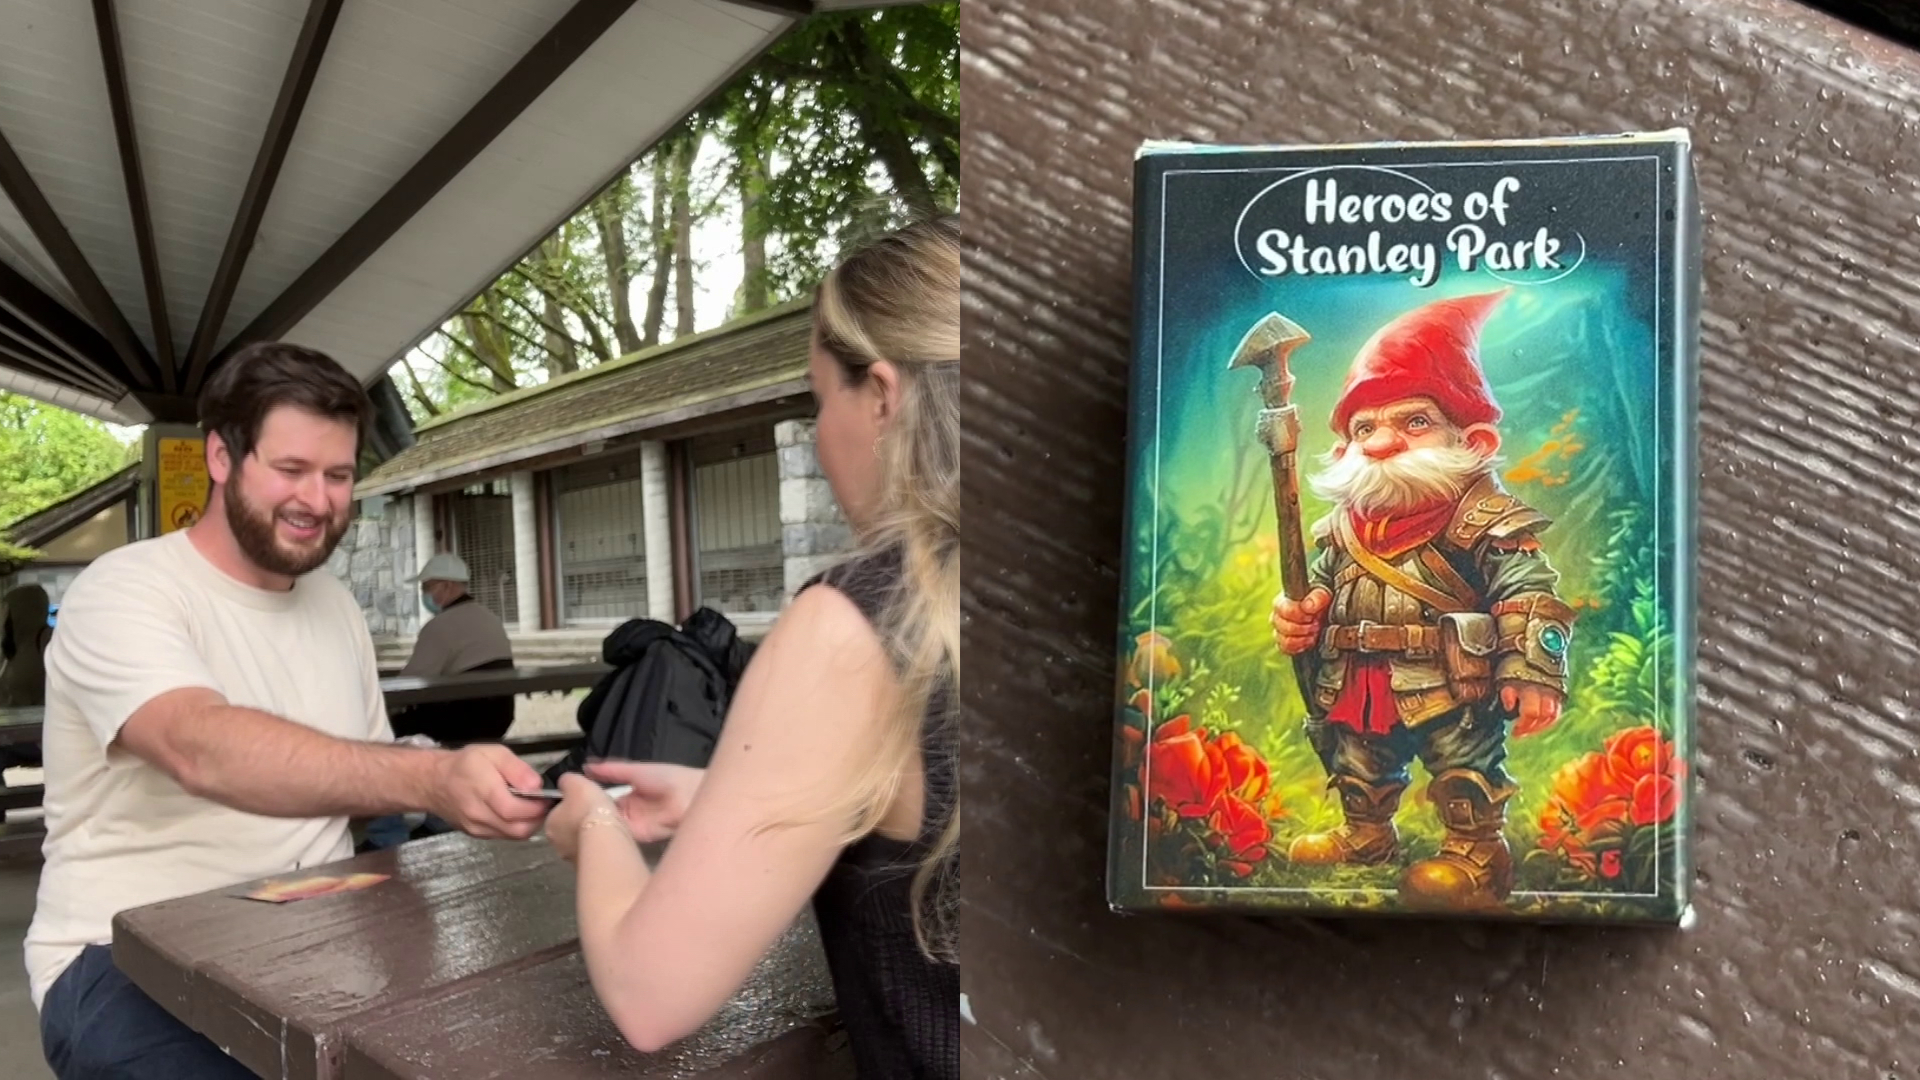 Vancouver man creates card game inspired by Stanley Park